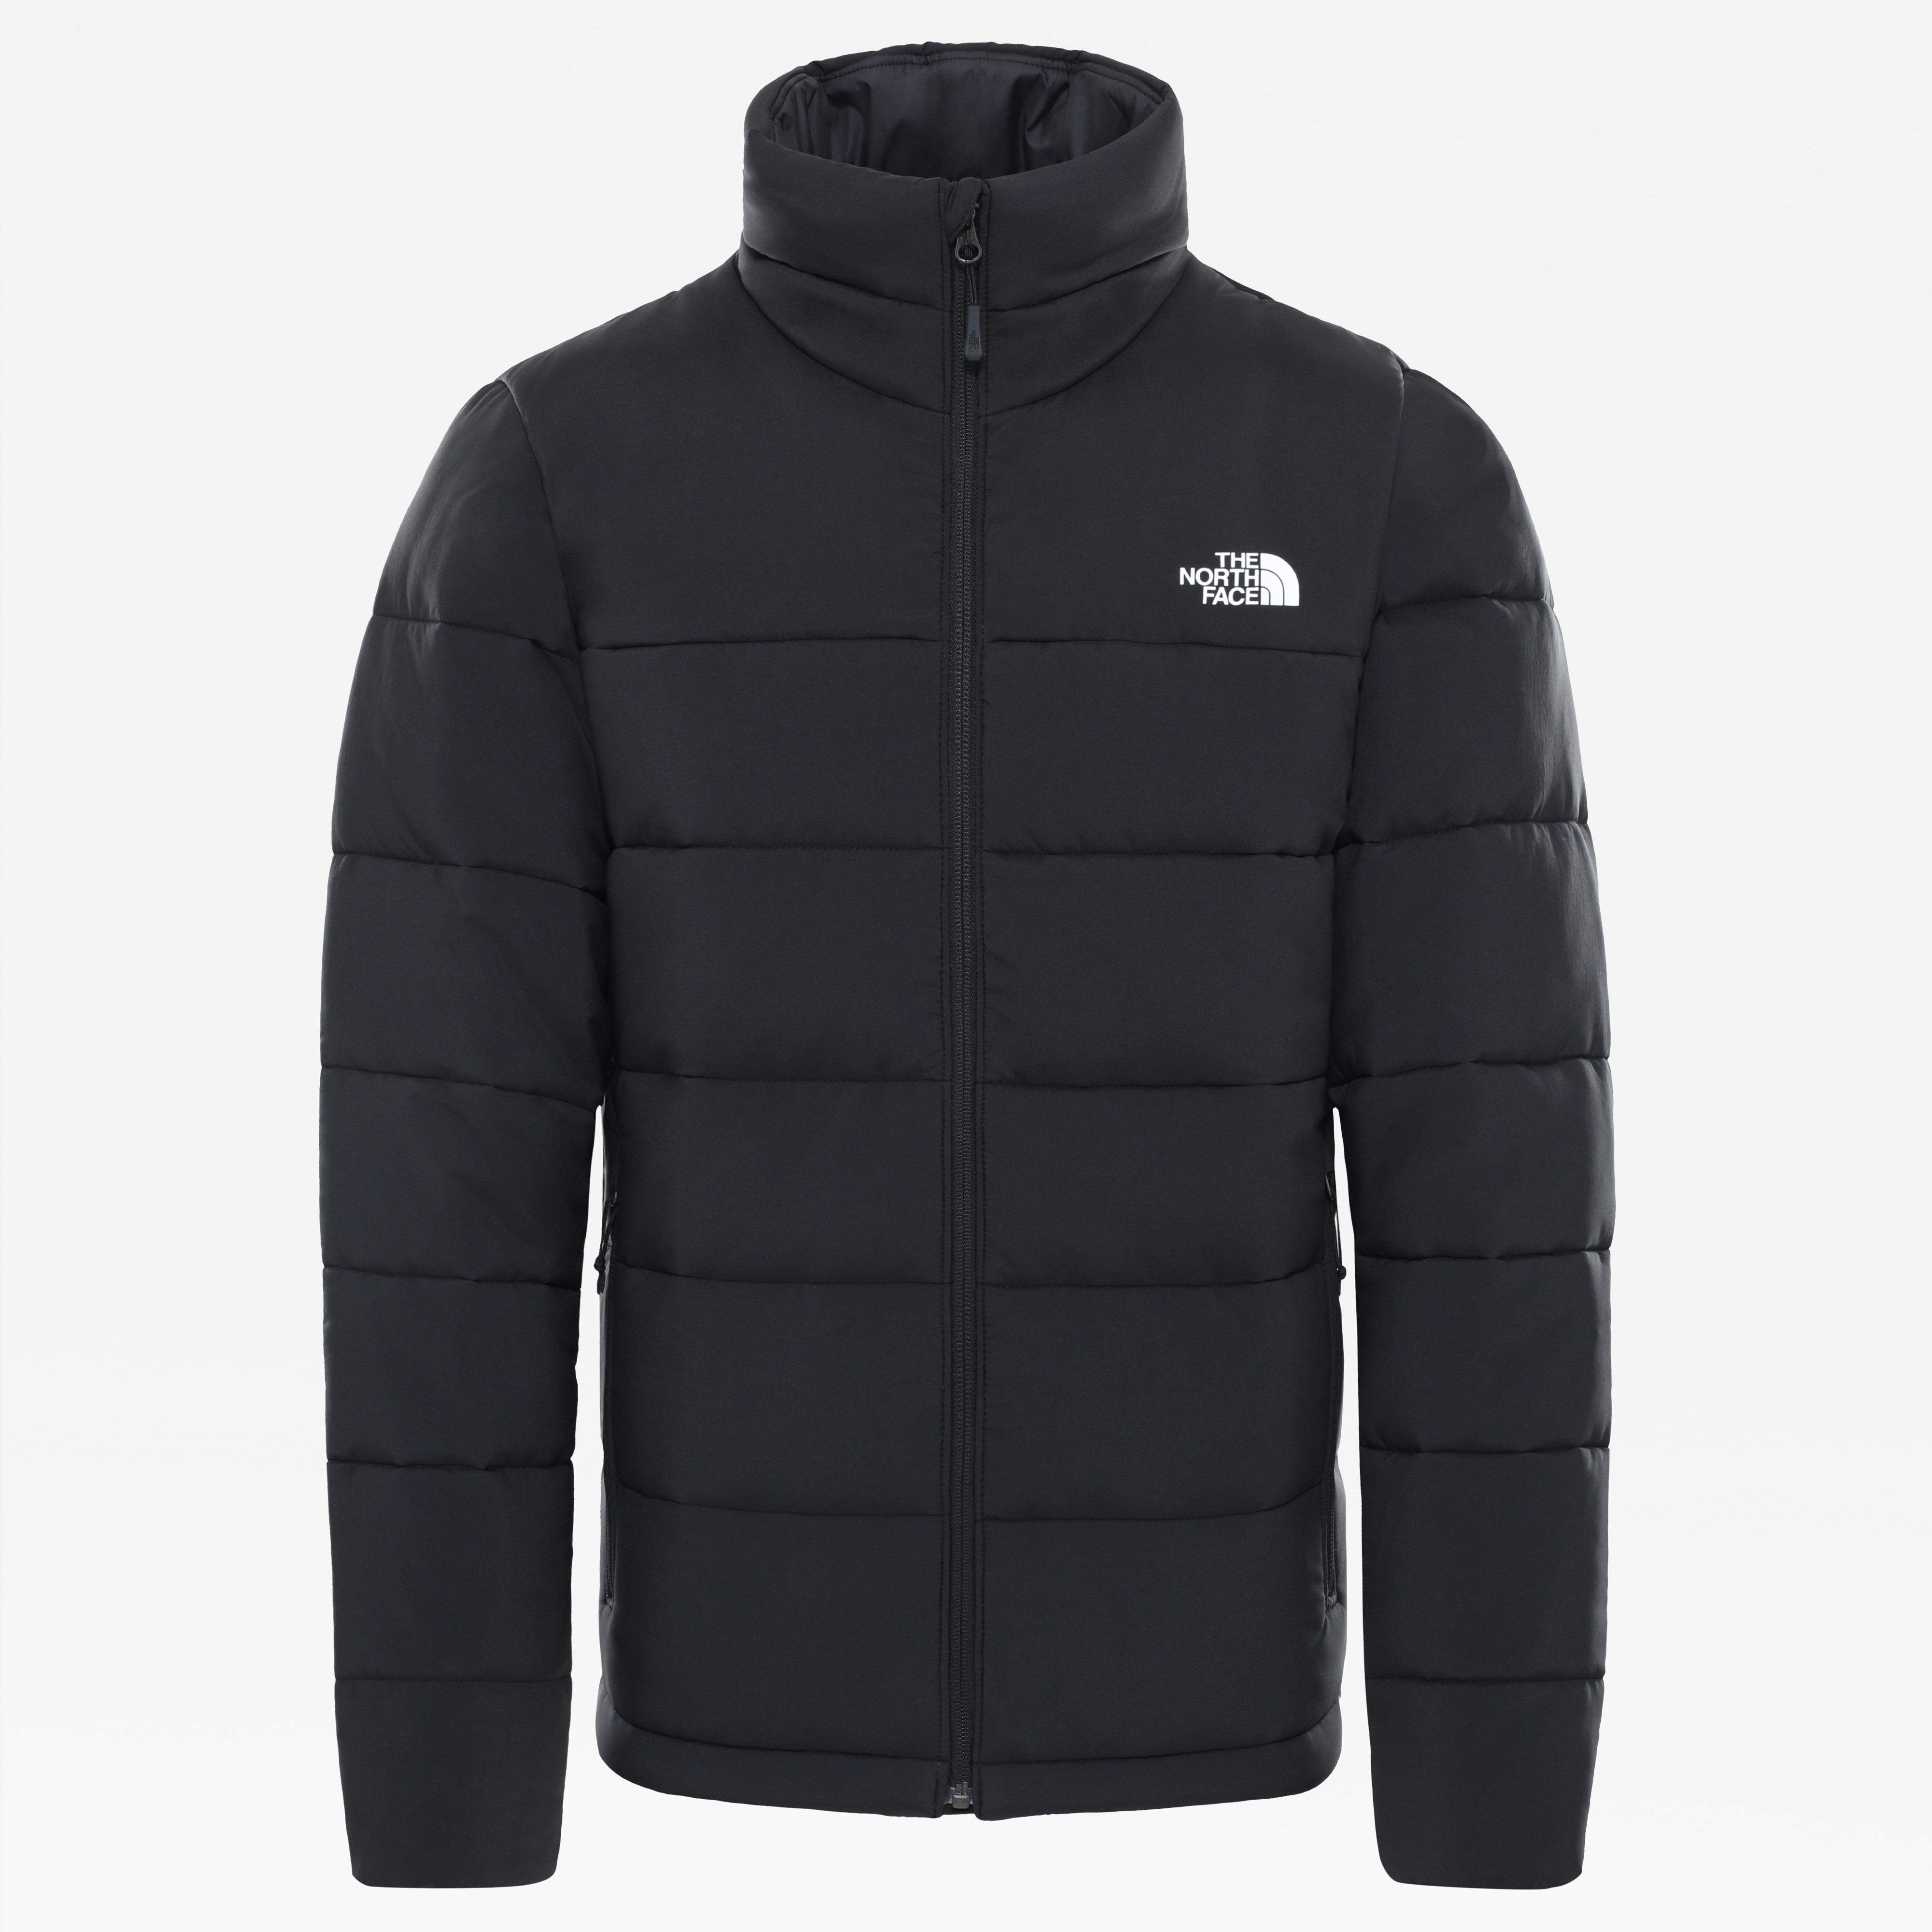 white puffy north face jacket